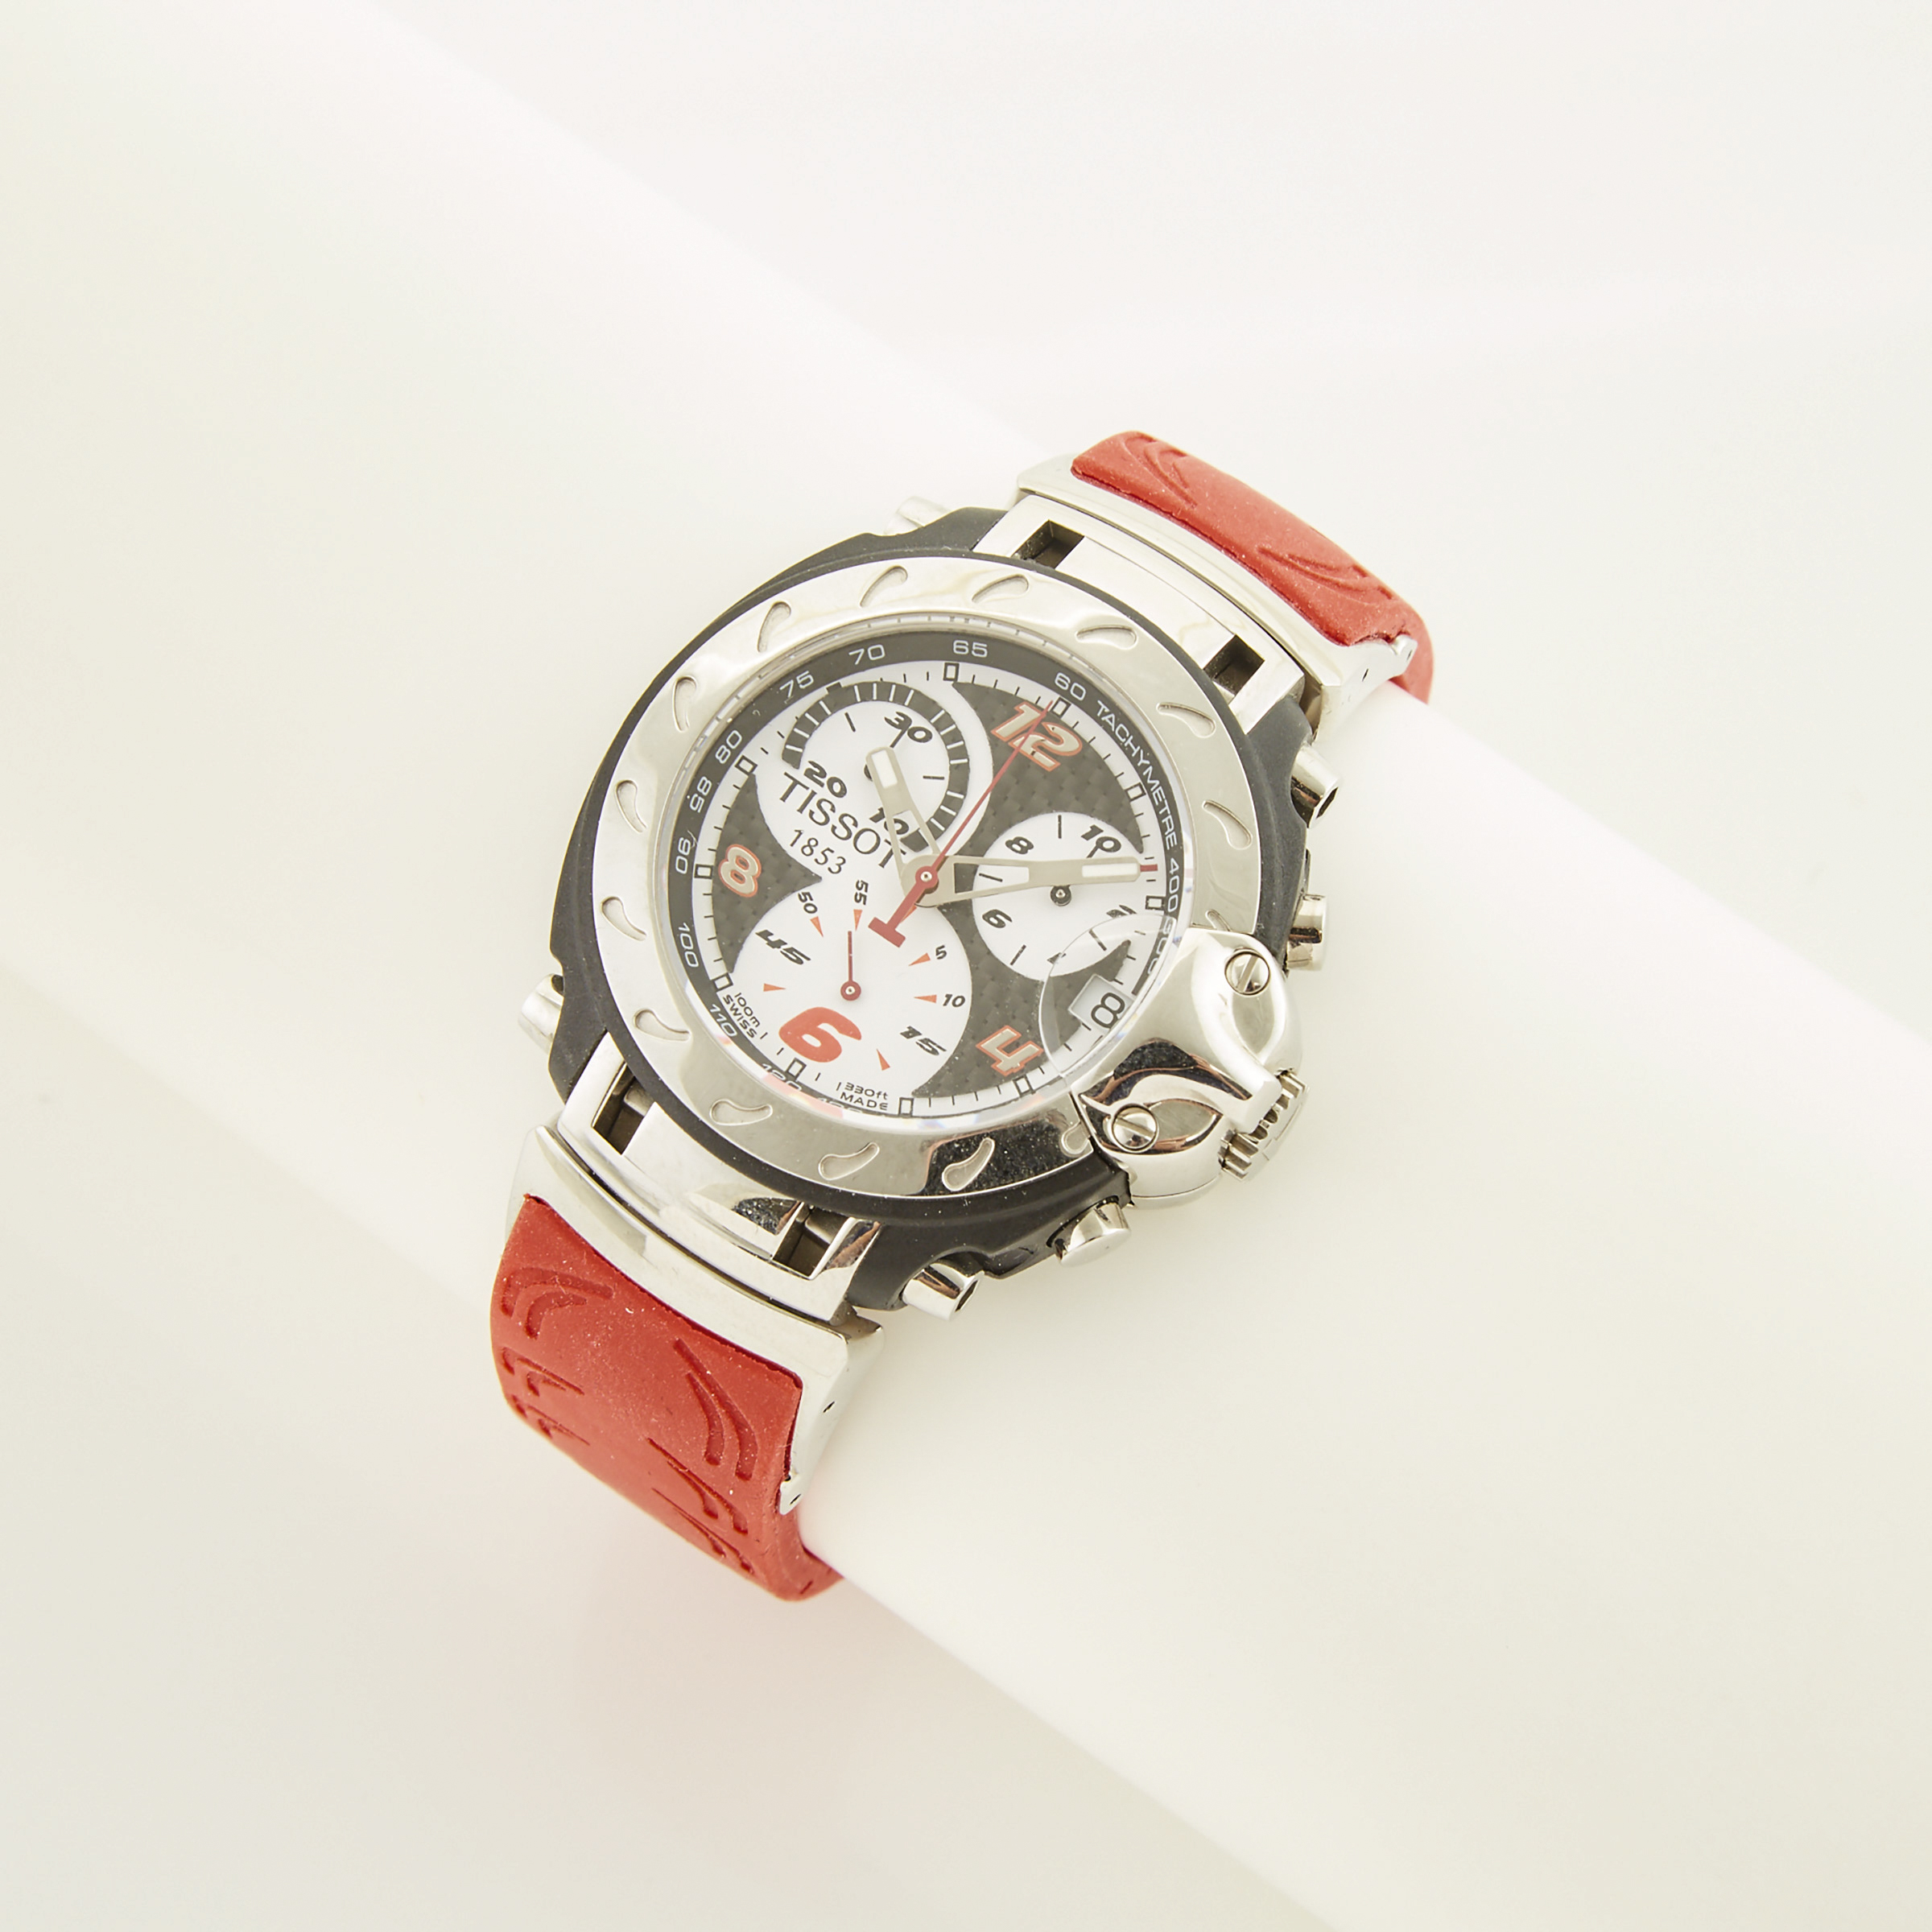 Tissot T-Race MotoGP 2007 Limited Edition Wristwatch With Date And Chronograph